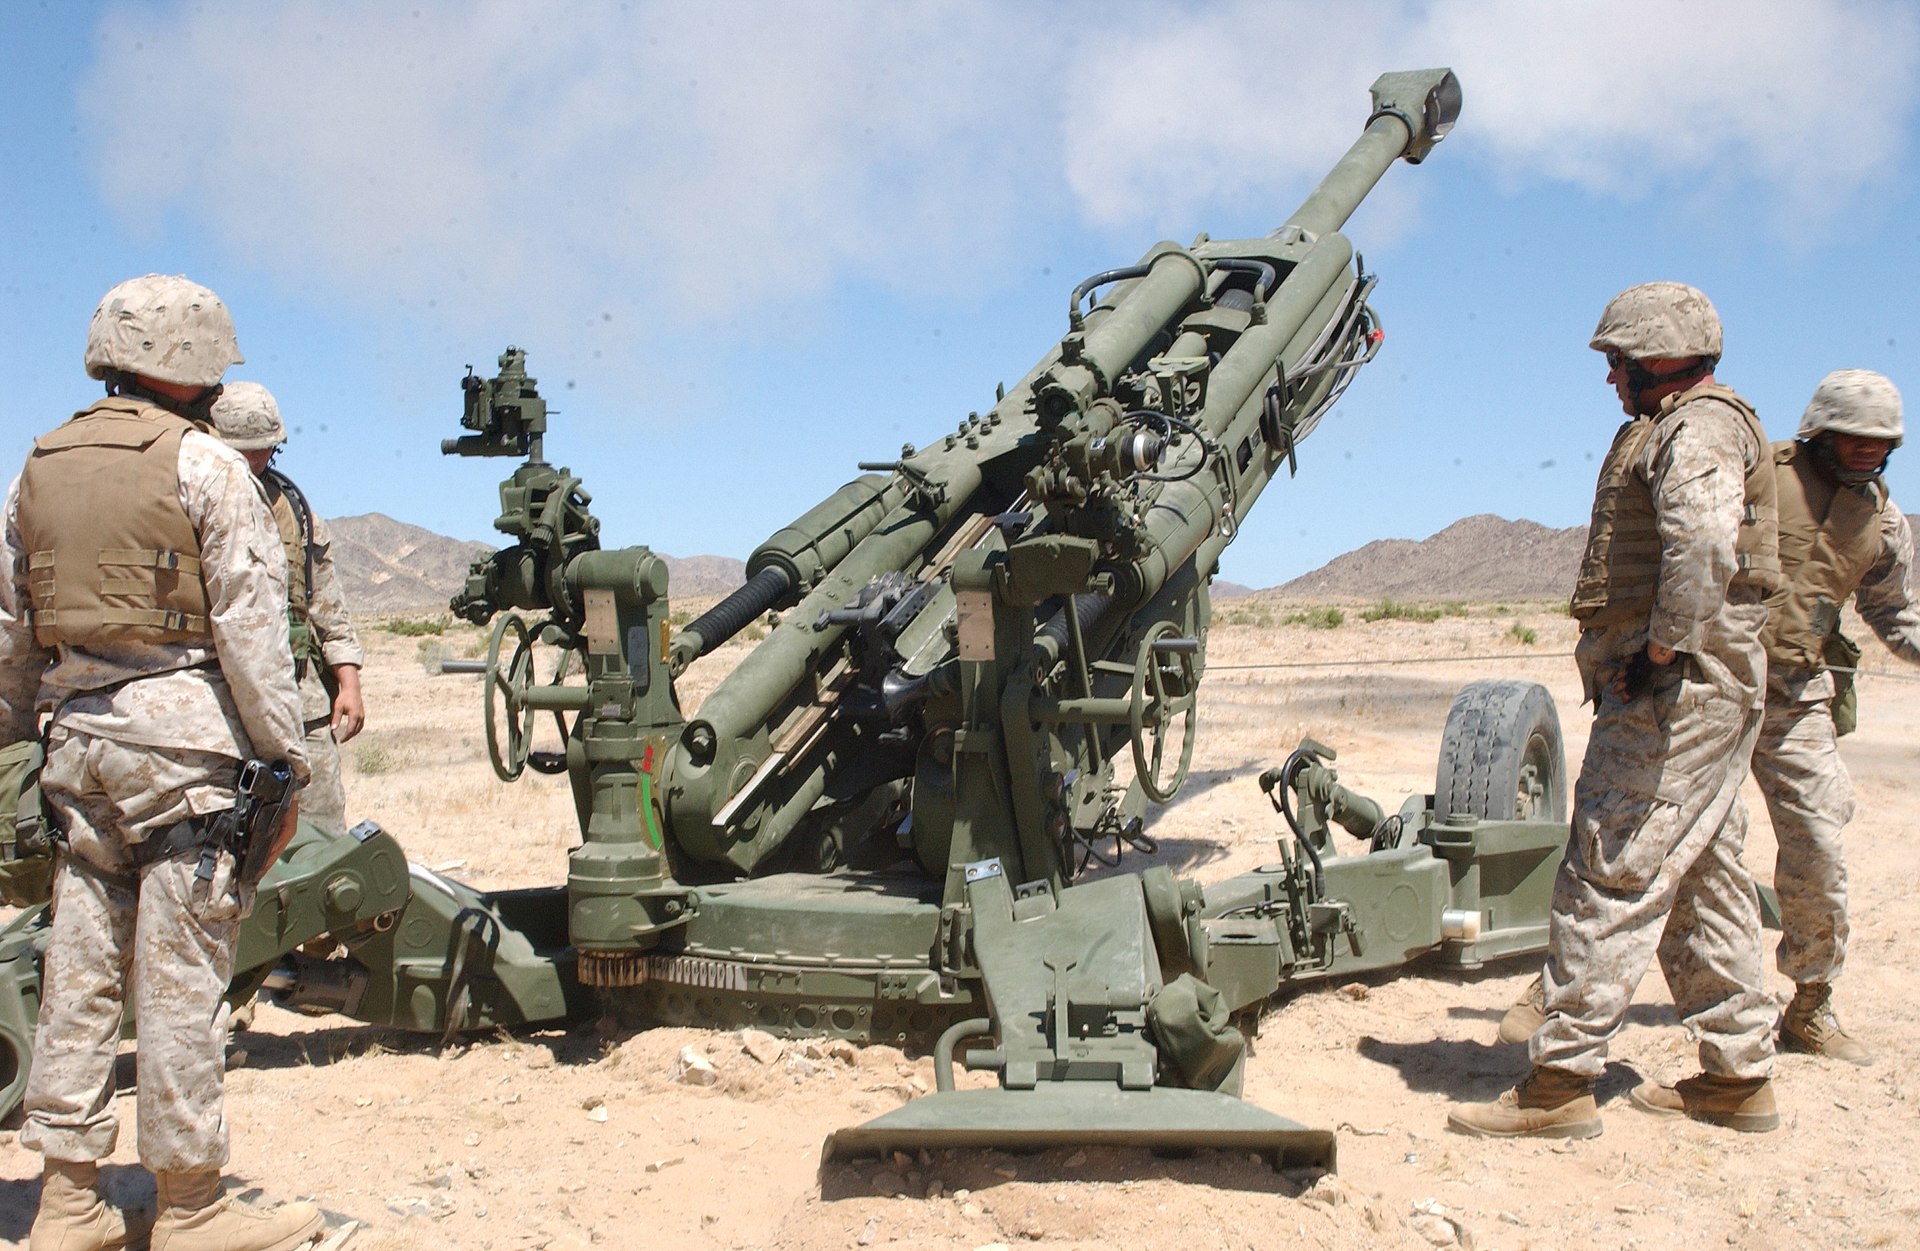 M777 howitzer technical manual pdf